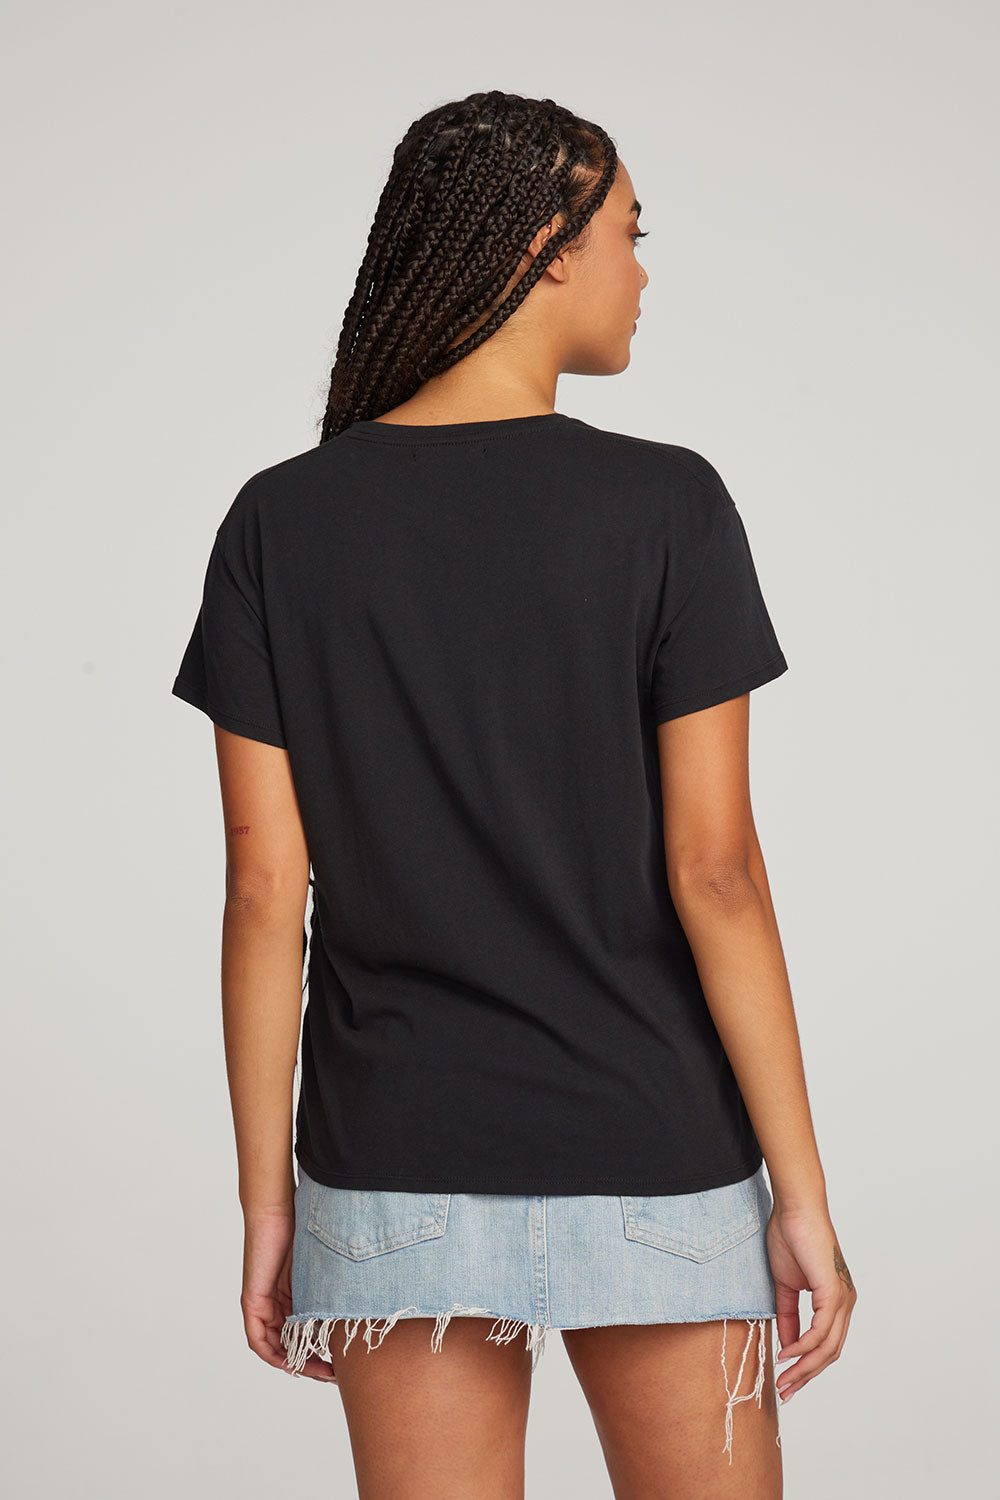 Everyday Essential Black Crew Neck Tee WOMENS chaserbrand